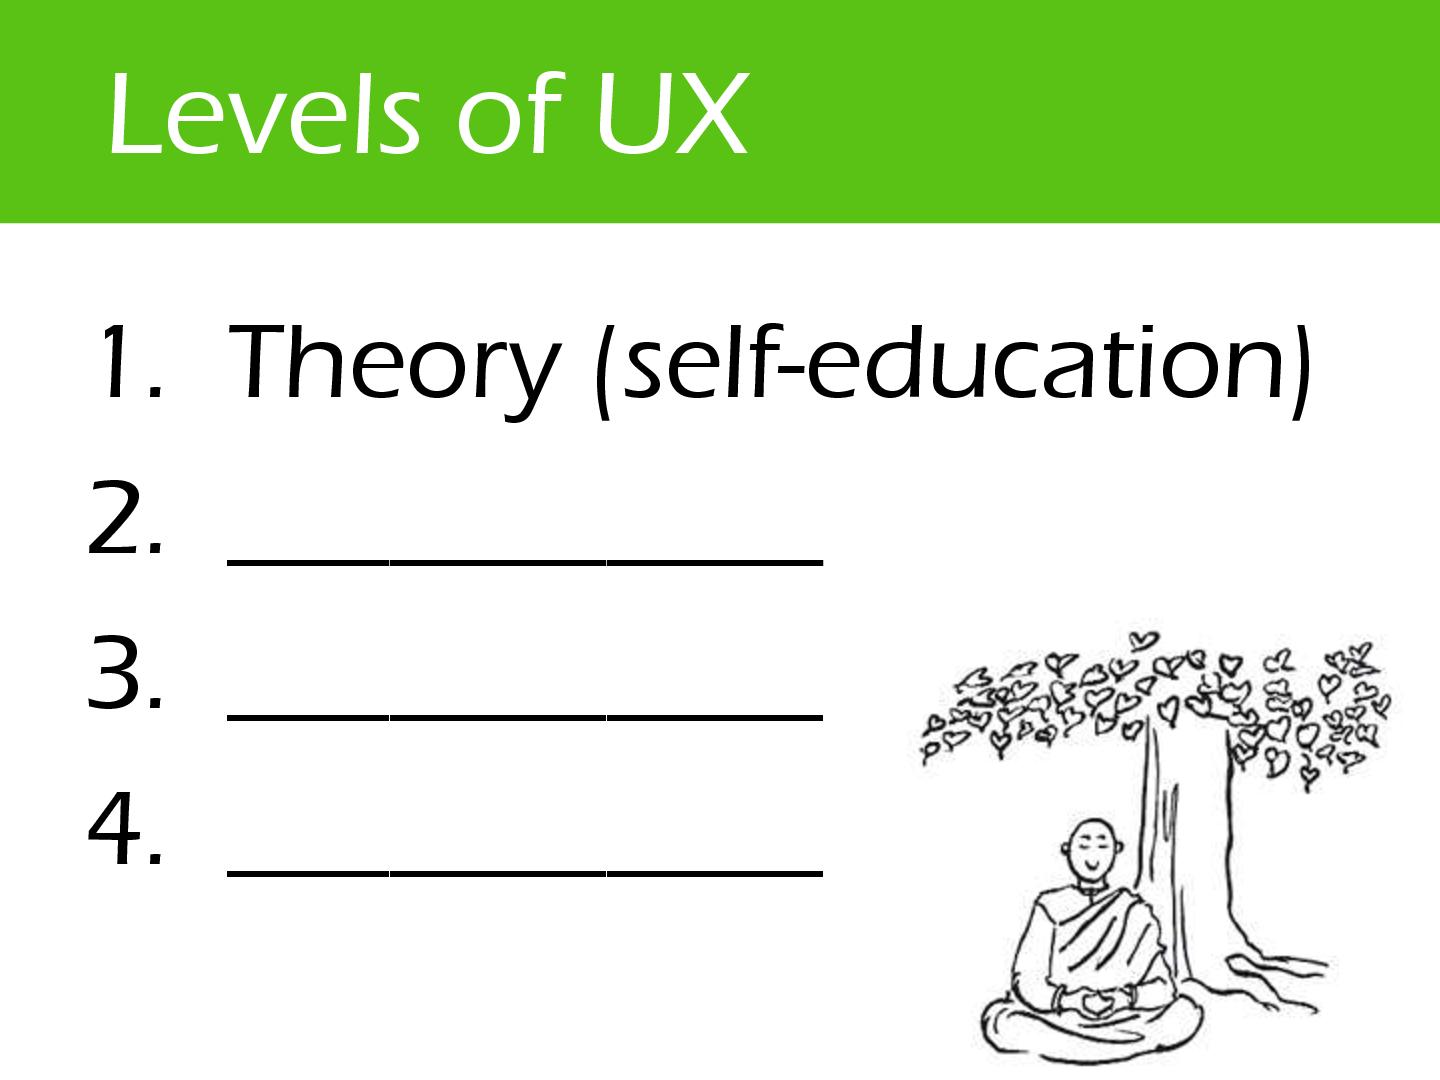 Файл:UX tips and tricks in Media and Entertainment. UX by feedback (Никита Манько, UXPeople-2013).pdf